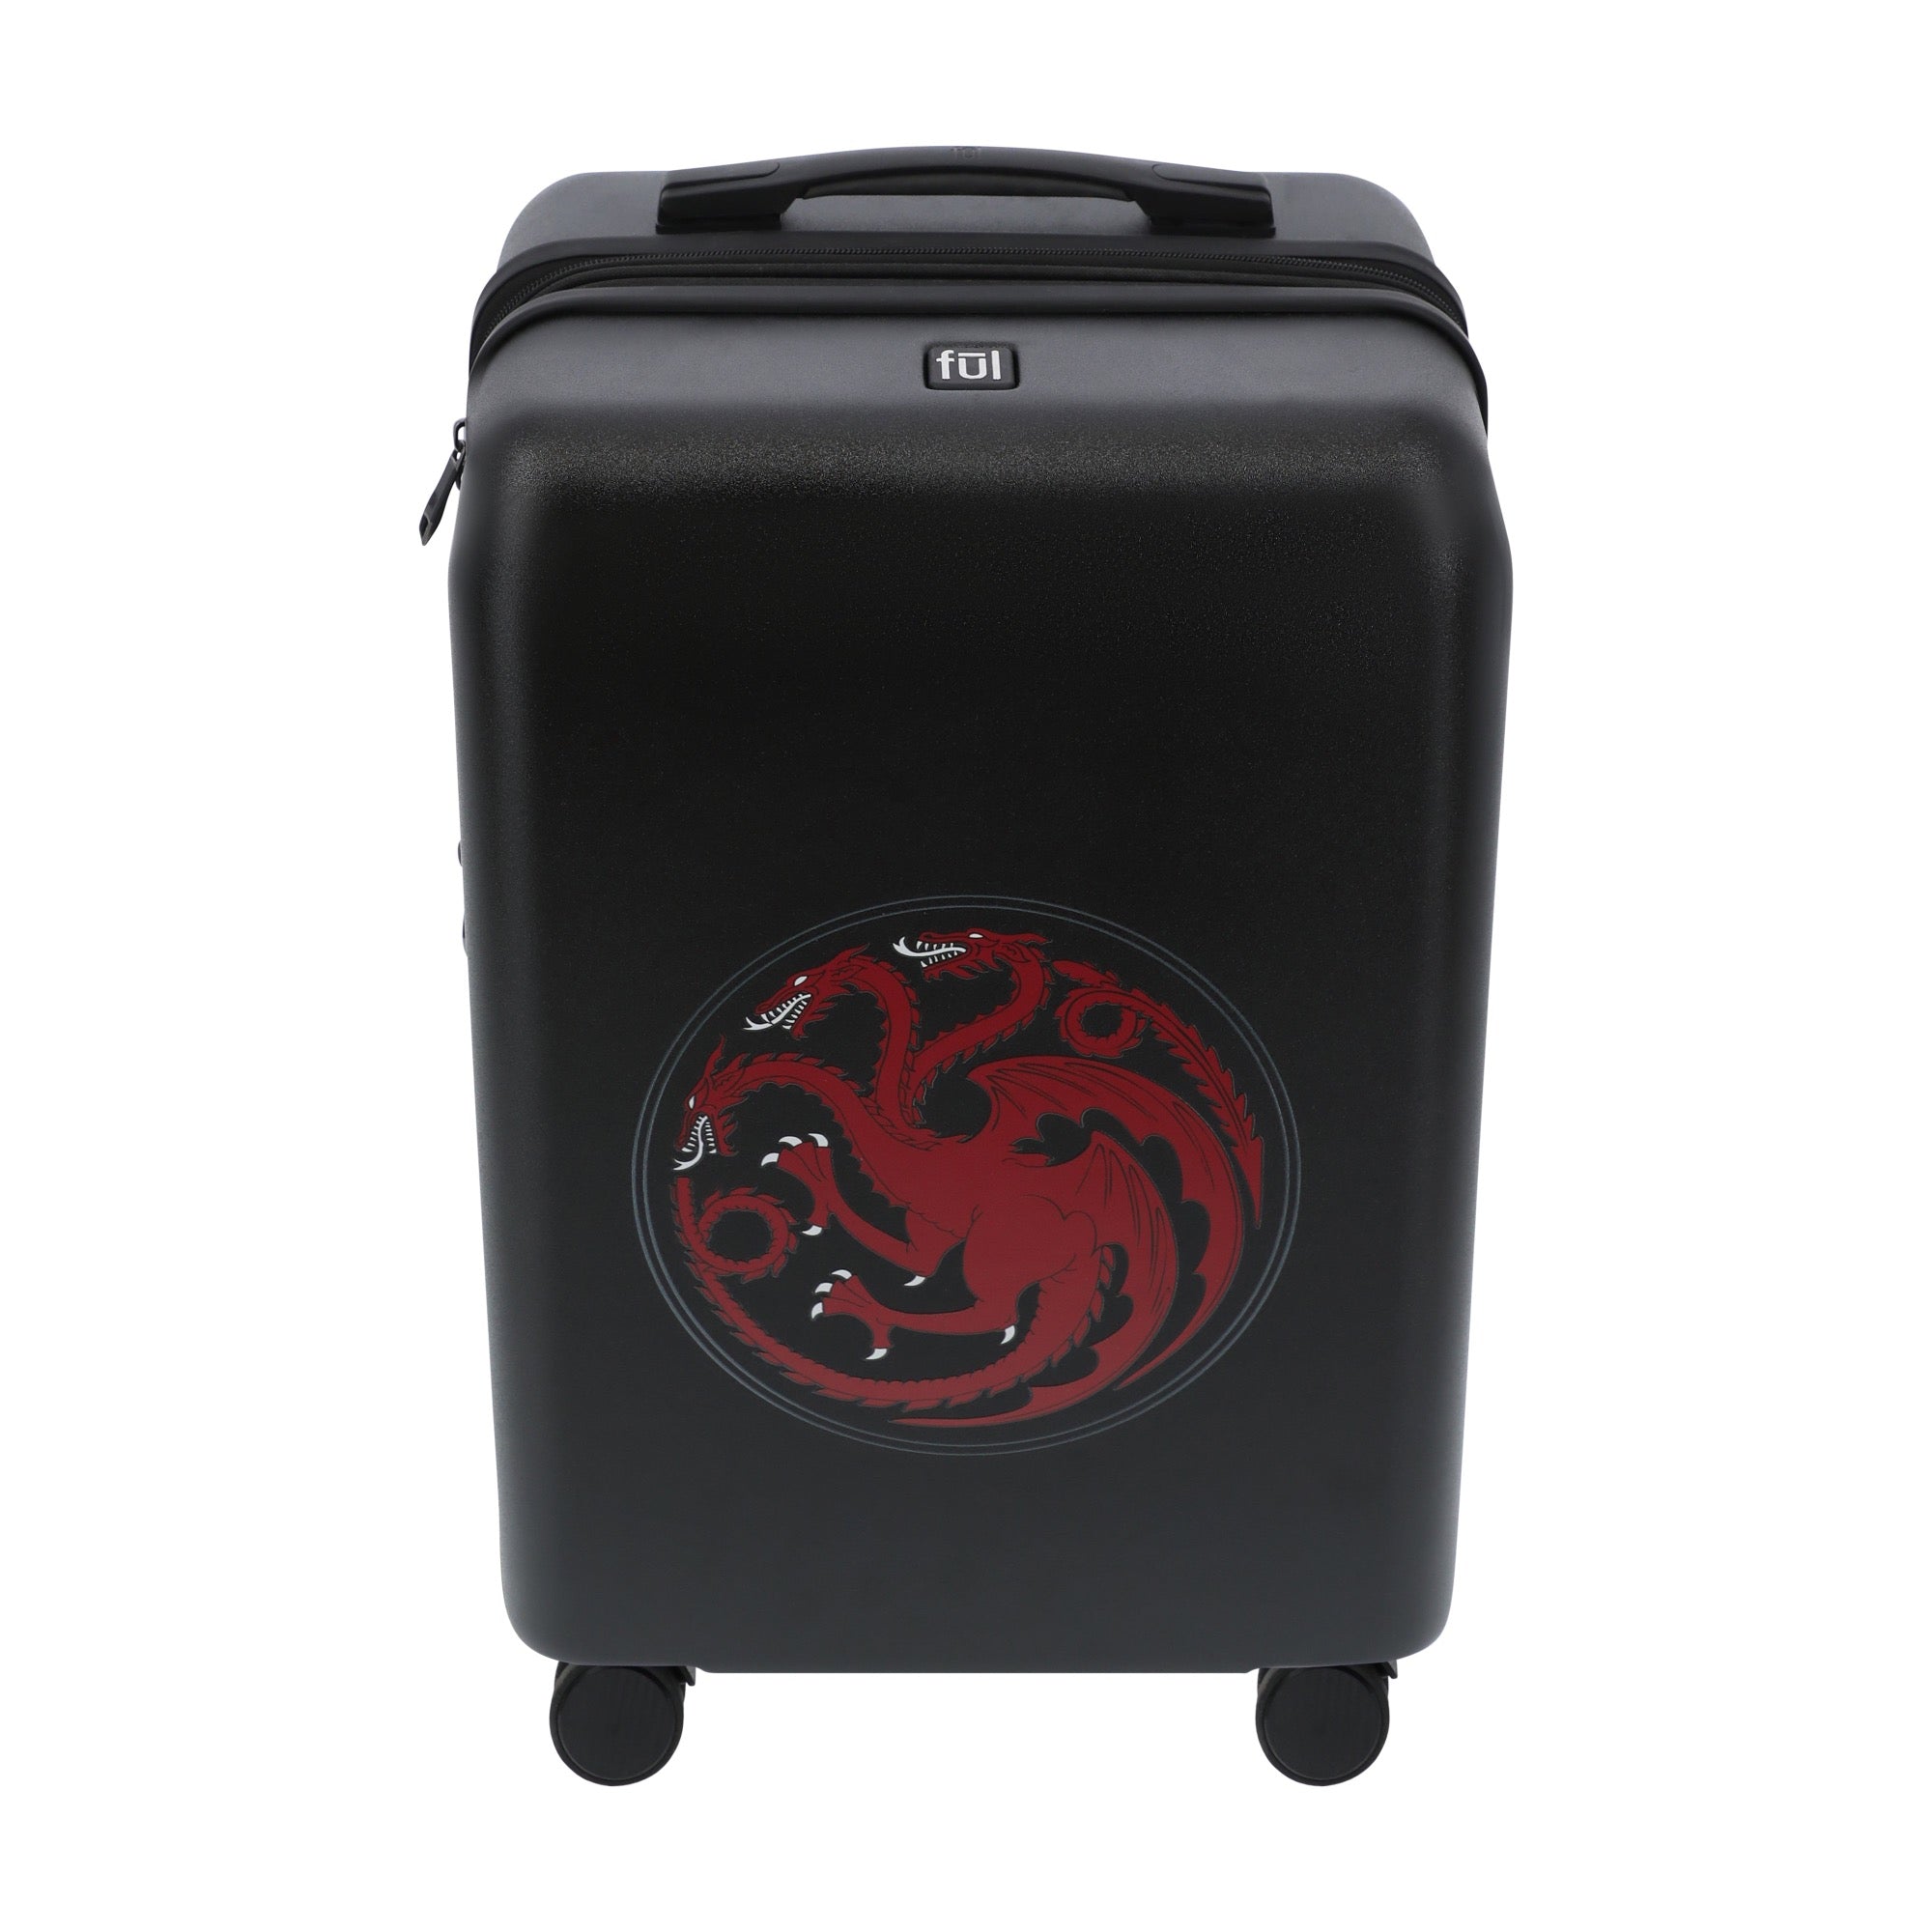 Black WB game of thrones 22.5" carry-on spinner suitcase luggage by Ful